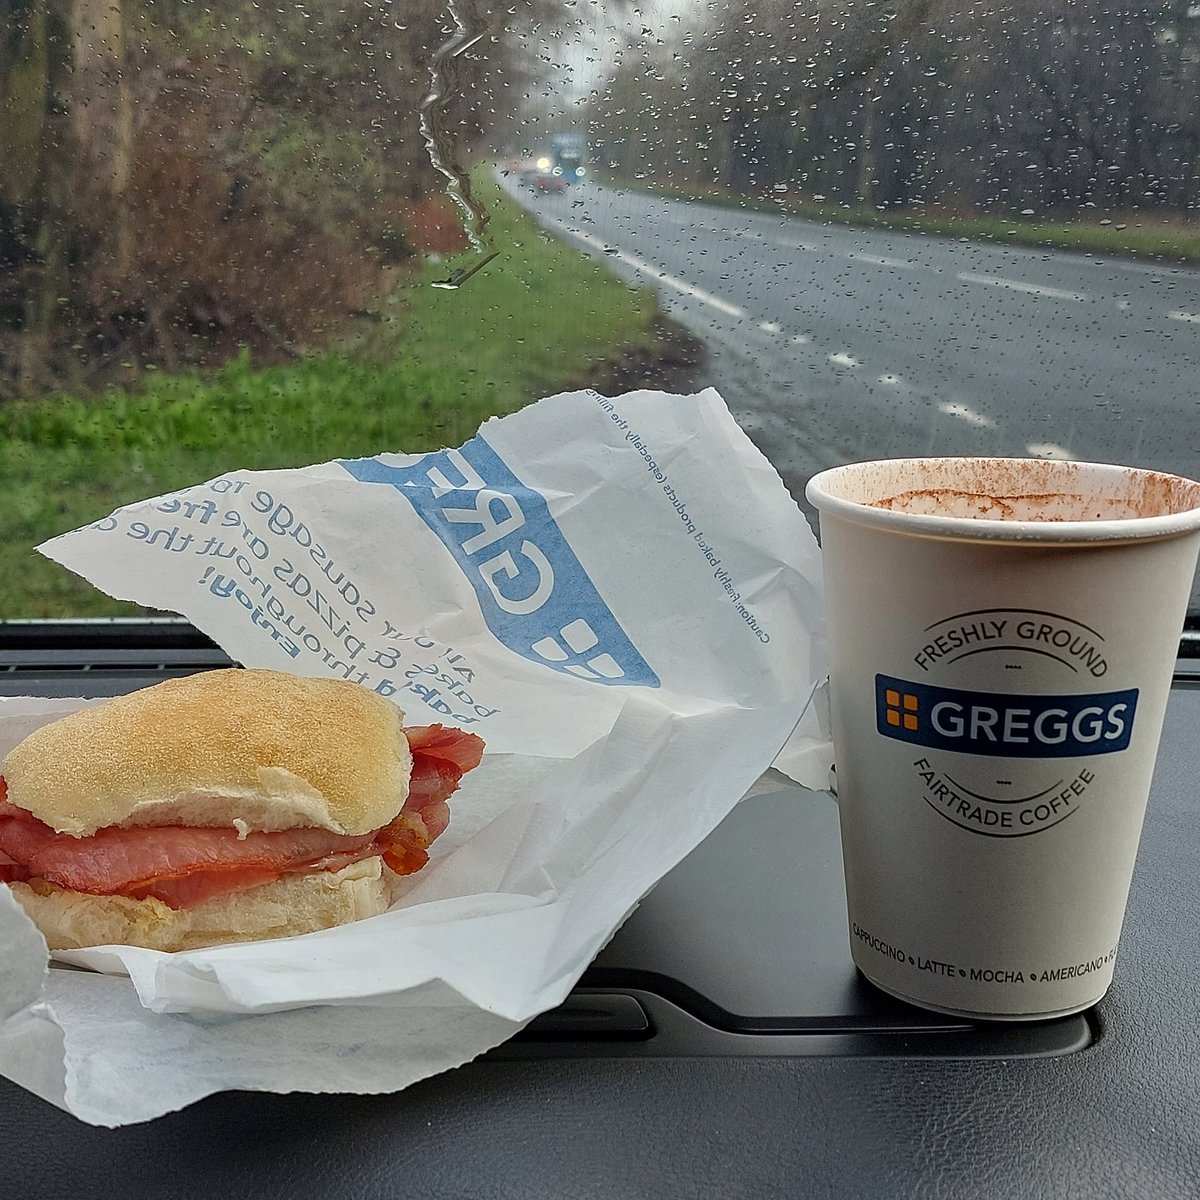 Trains, cars and daffodils today, but first things first #greggs #baconsandwich #cappucino #a1 #northumberland